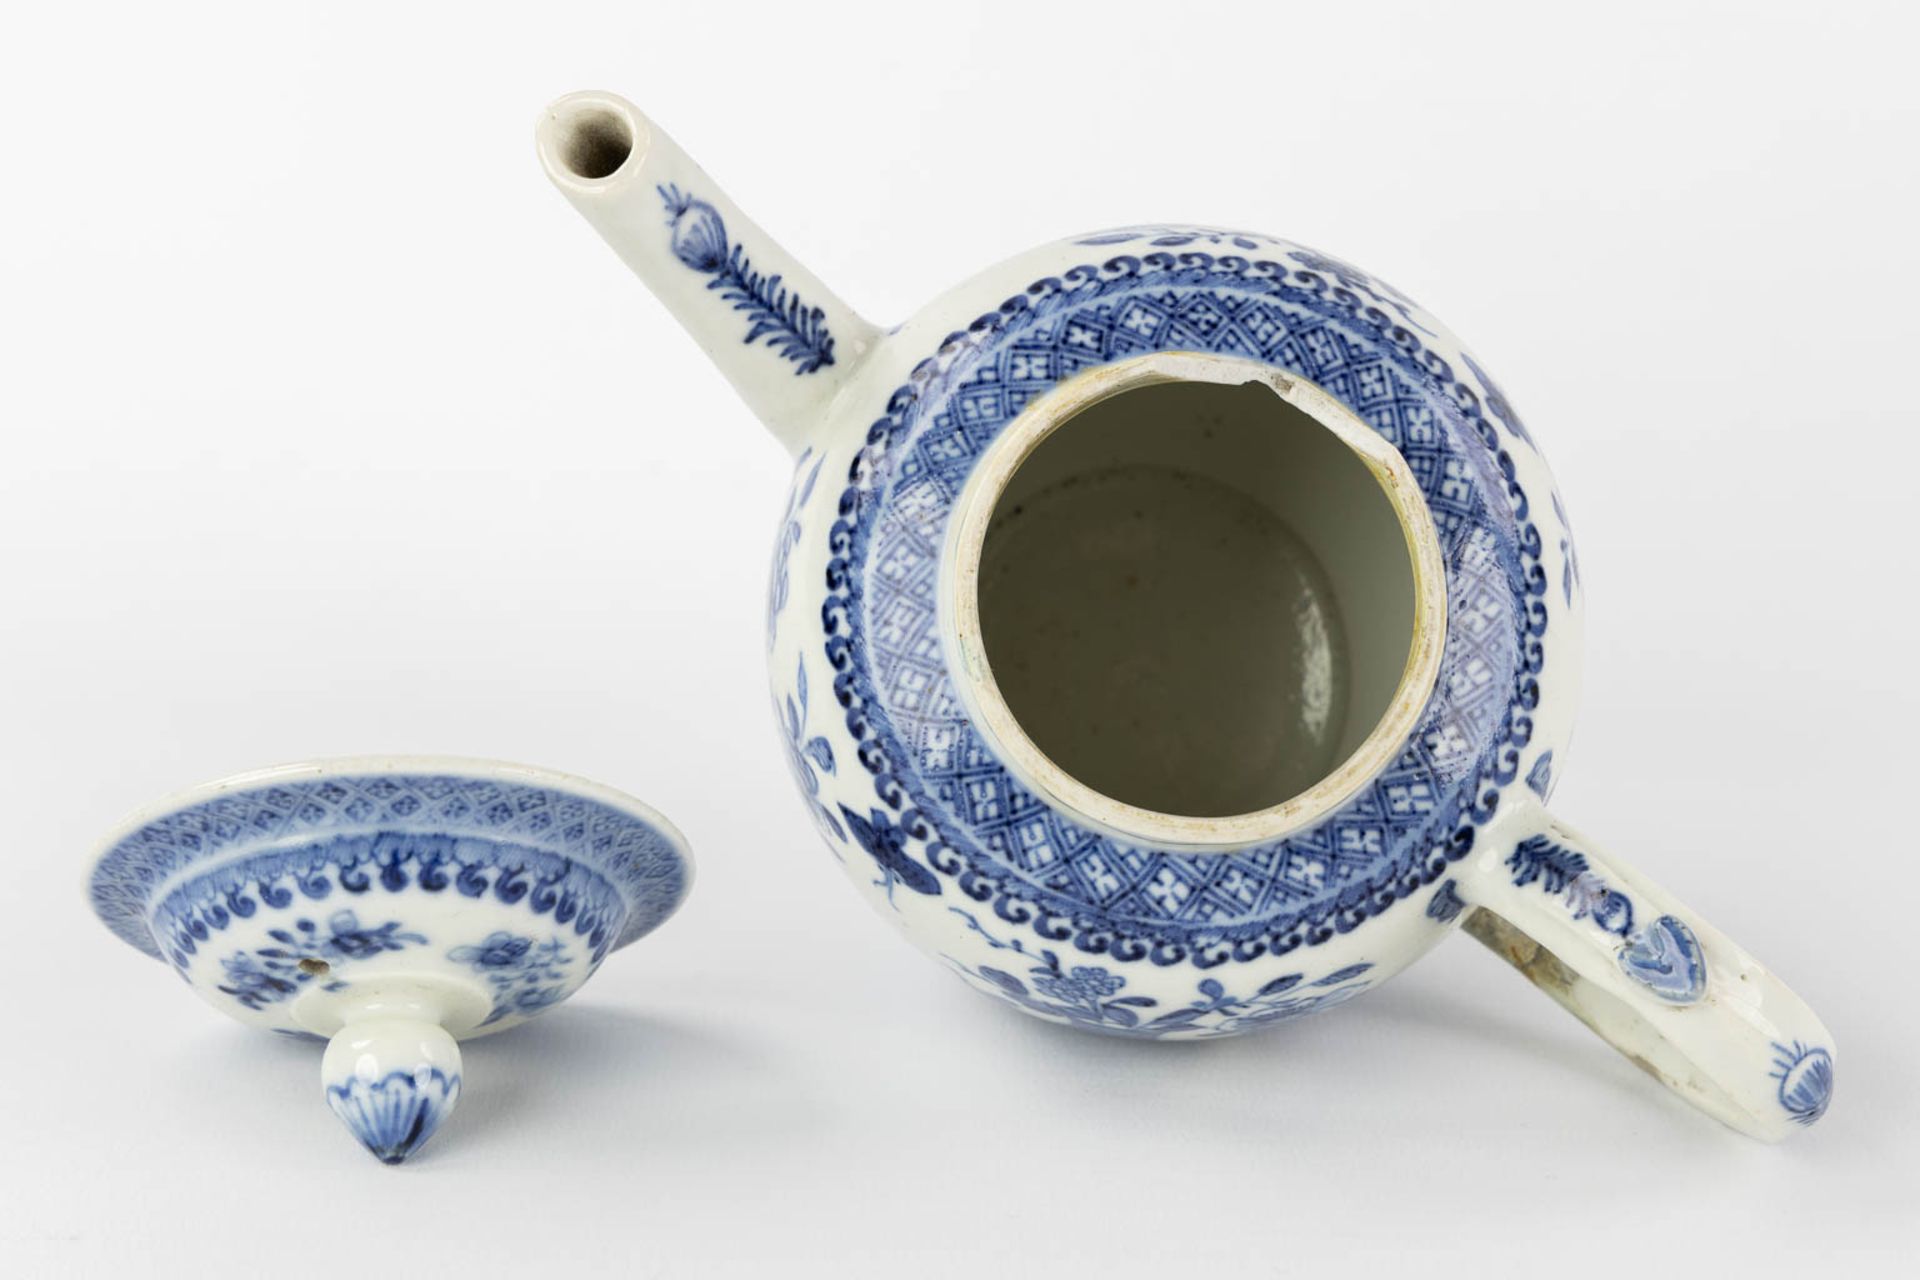 Three Chinese and Japanese teapots, blue-white decor. (W:20 x H:14 cm) - Image 8 of 17